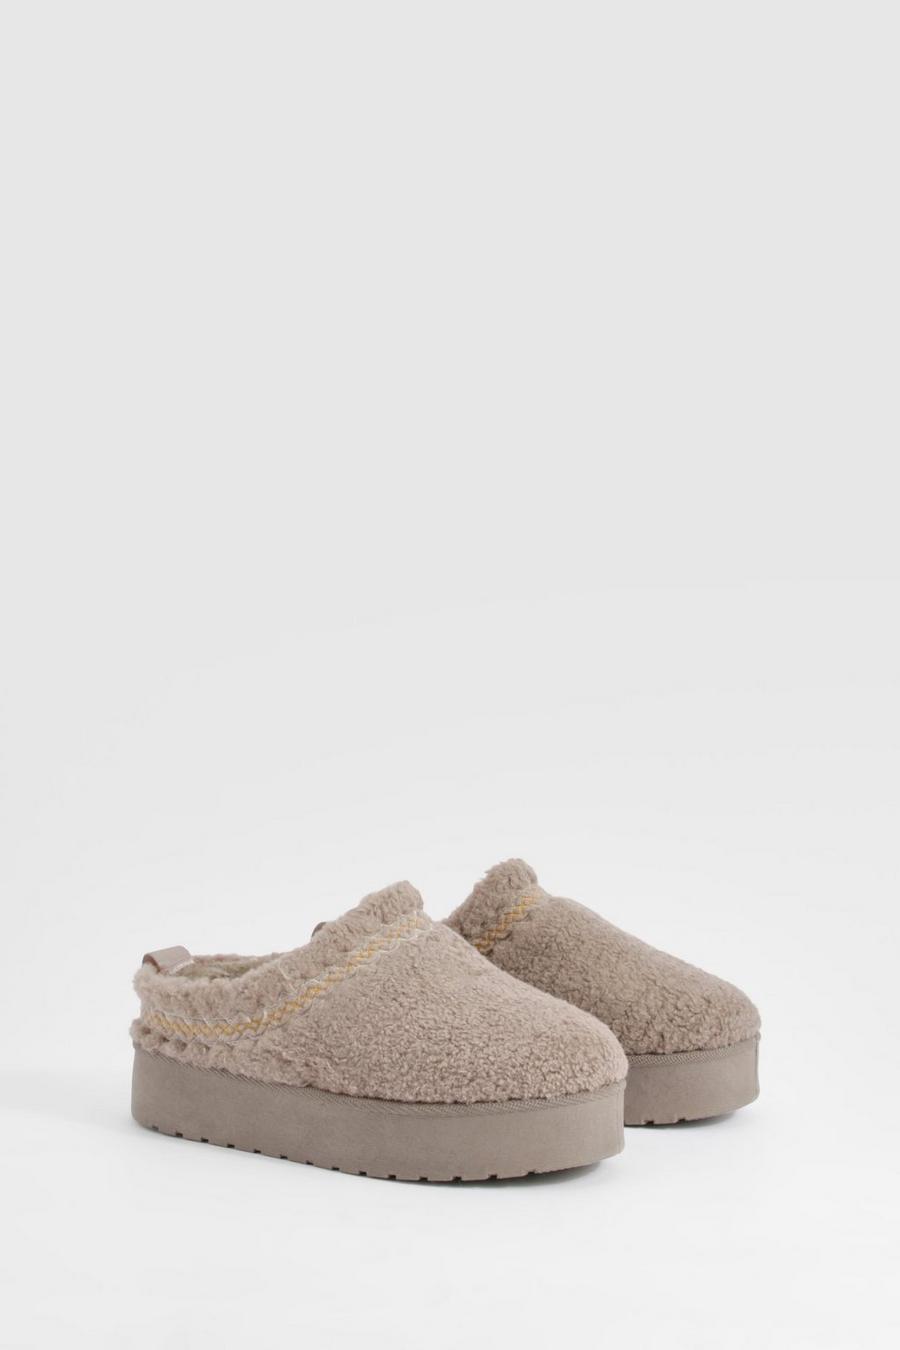 Taupe Borg Embroidered Platform Cozy Mules